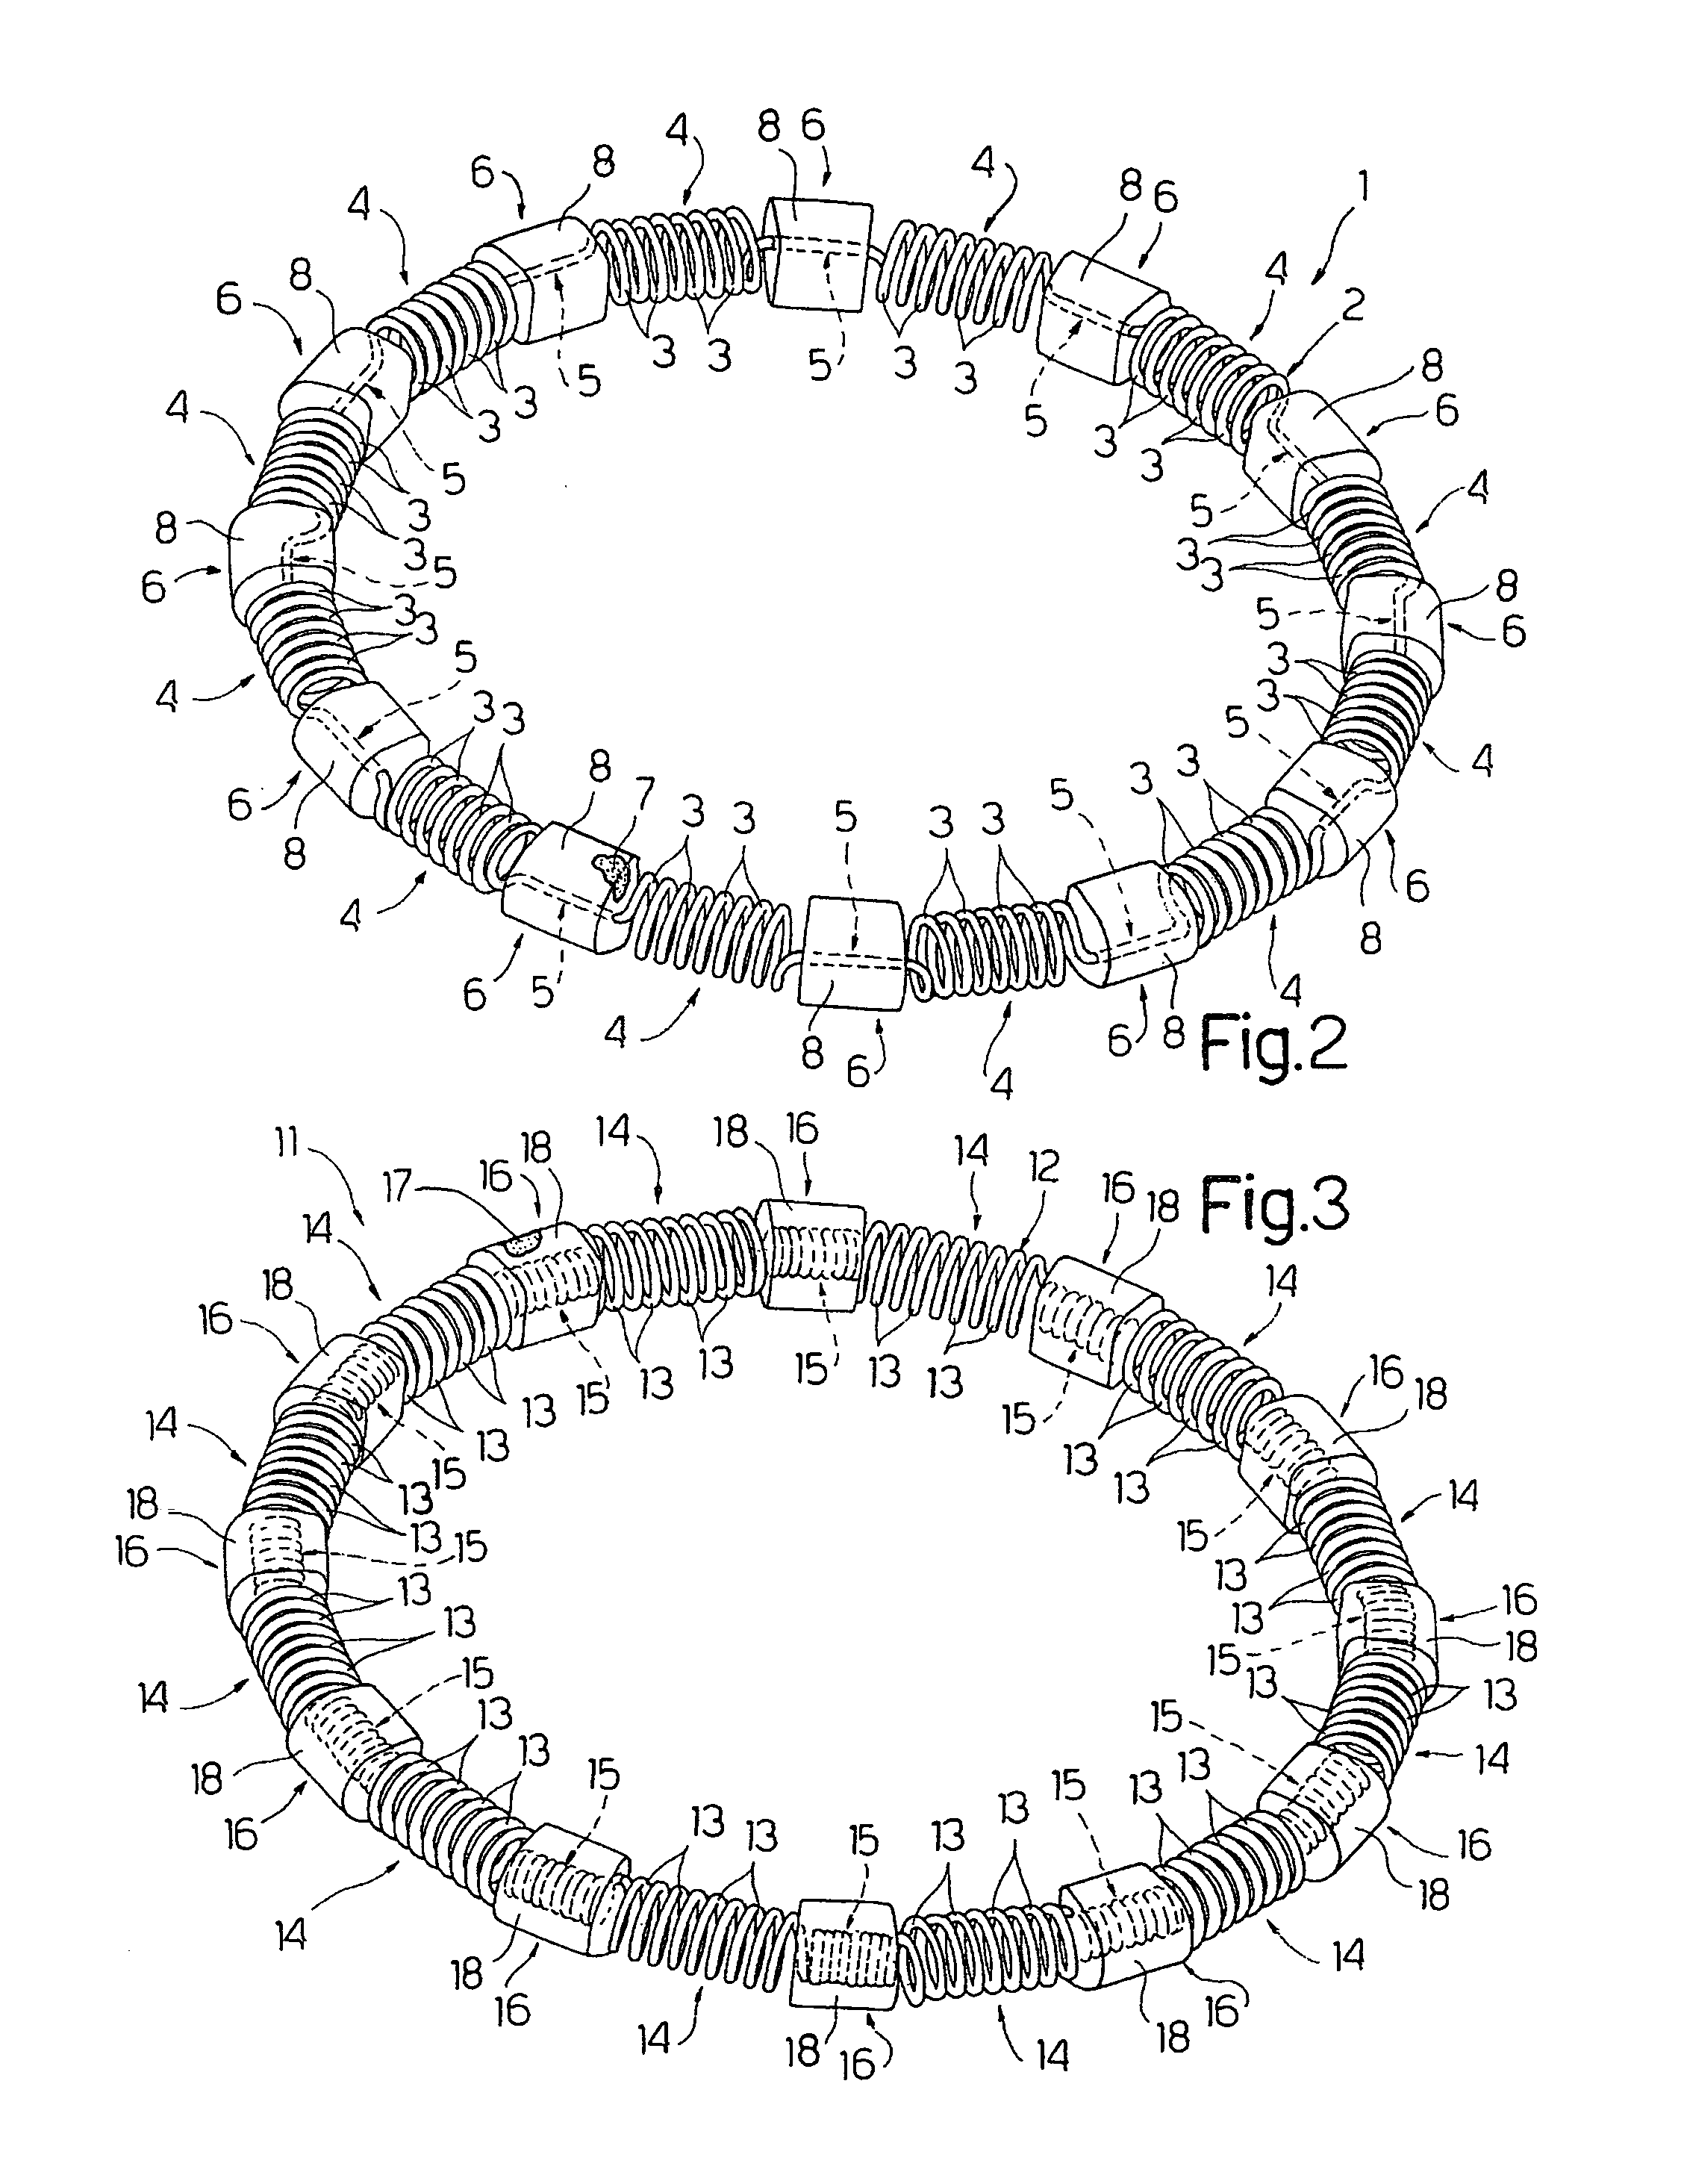 Intracardiac device for restoring the functional elasticity of the cardiac structures, holding tool for the intracardiac device, and method for implantation of the intracardiac device in the heart